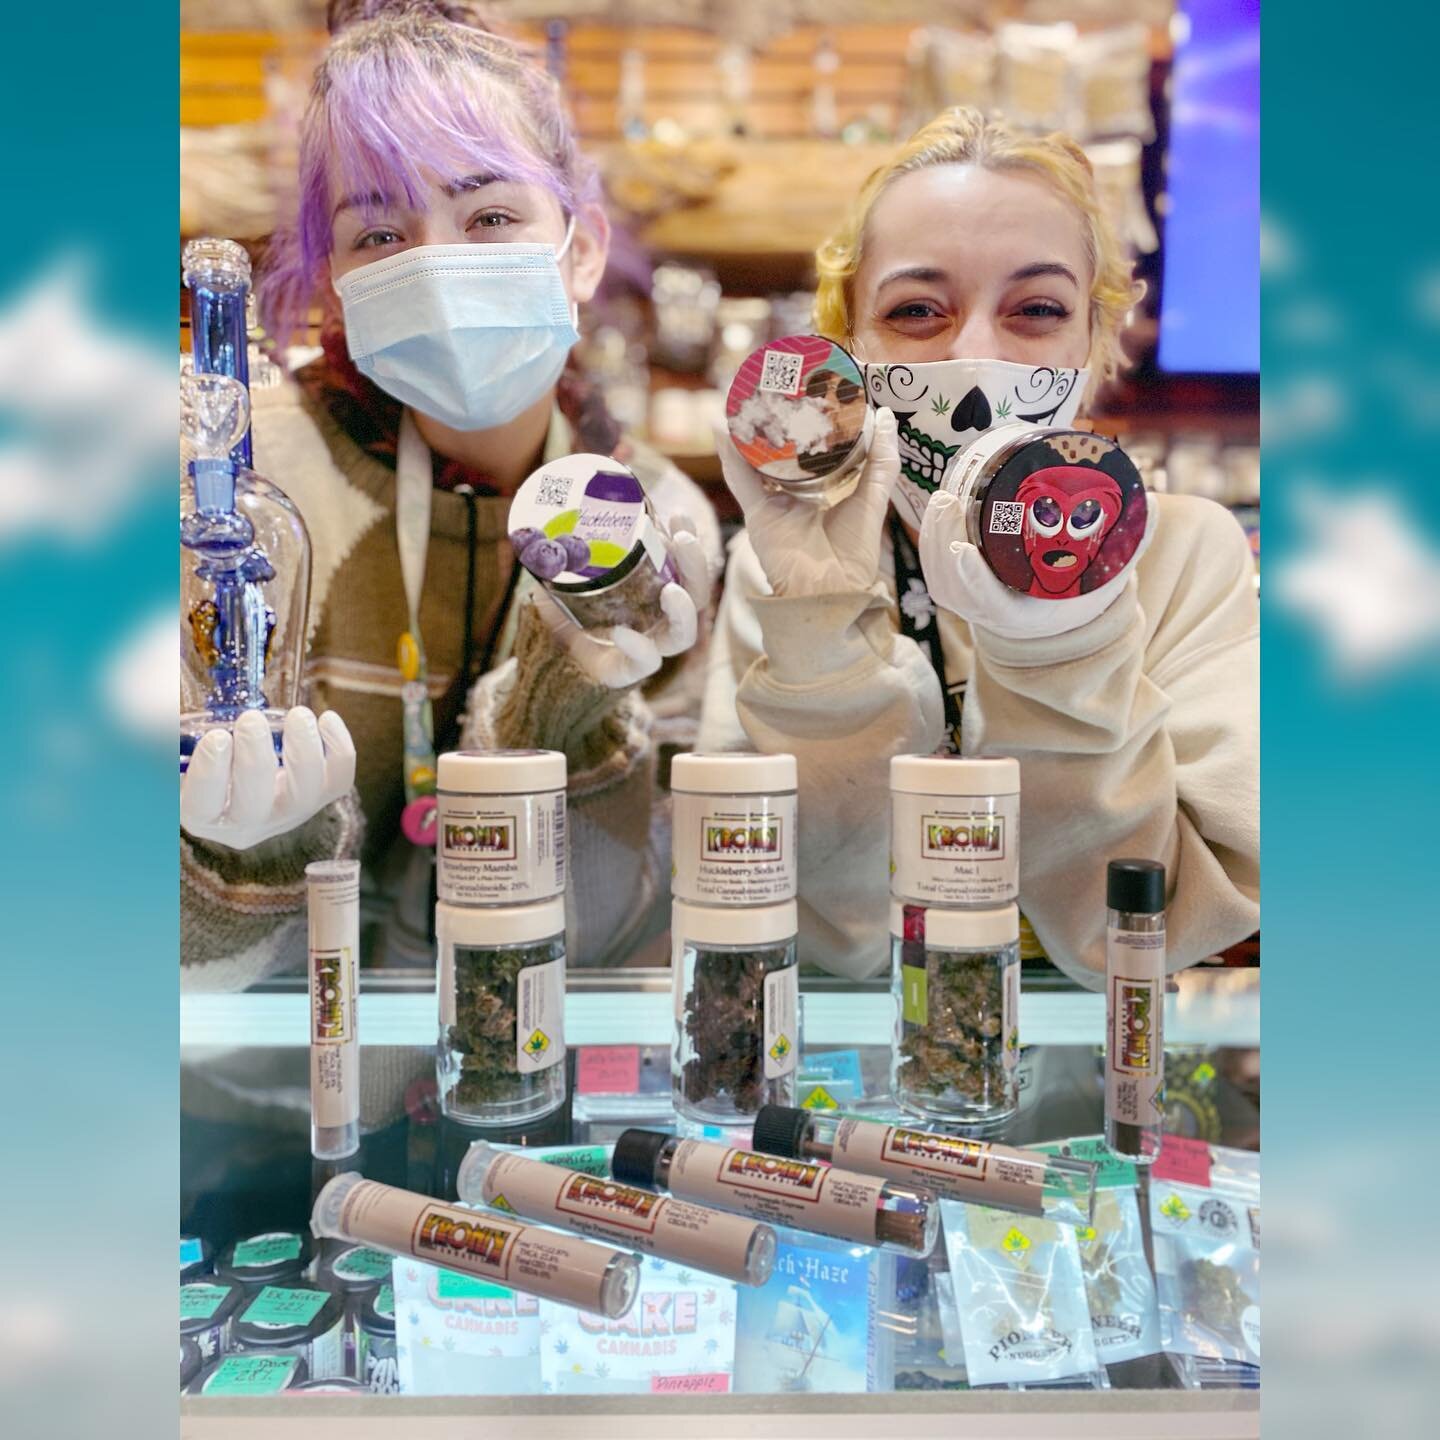 Fresh drop of @kronik_cannabis 🤩Just in time for Fatter J Saturday! 🤑
Swoop by the shop and ask Chel or Rachel to show you their awesome new strains! 🥳
-
-
-

WARNING: This product has intoxicating effects and may be habit forming. There may be he